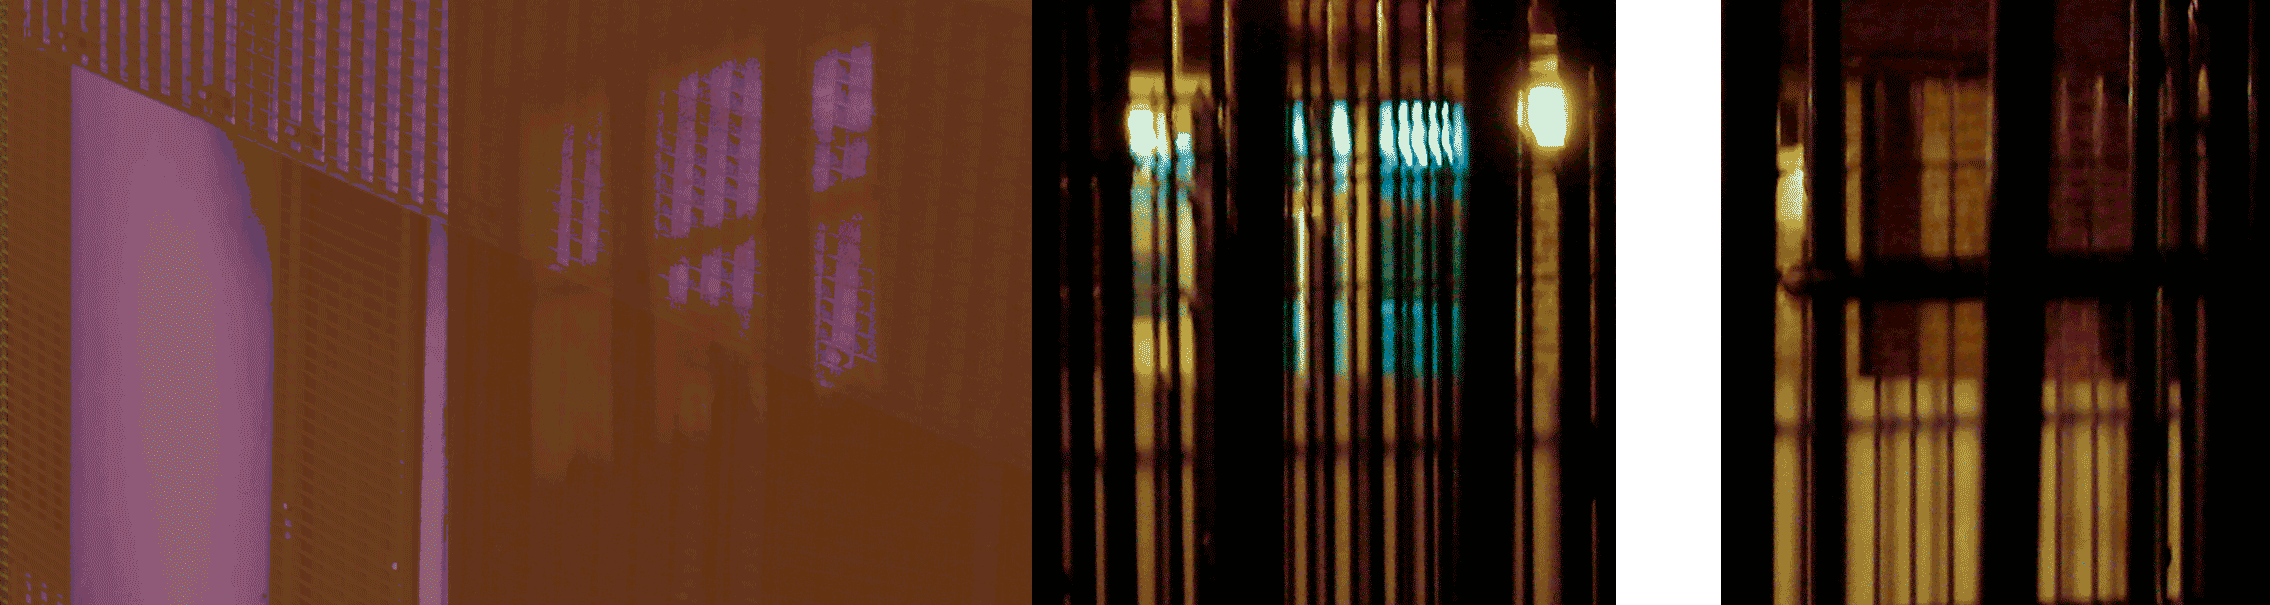 [scene 21 panning]<br />
			dancing verticals, light glowing between the bars<br />
			in a <span class="enlarge">shadow play</span> of pictorial illusion